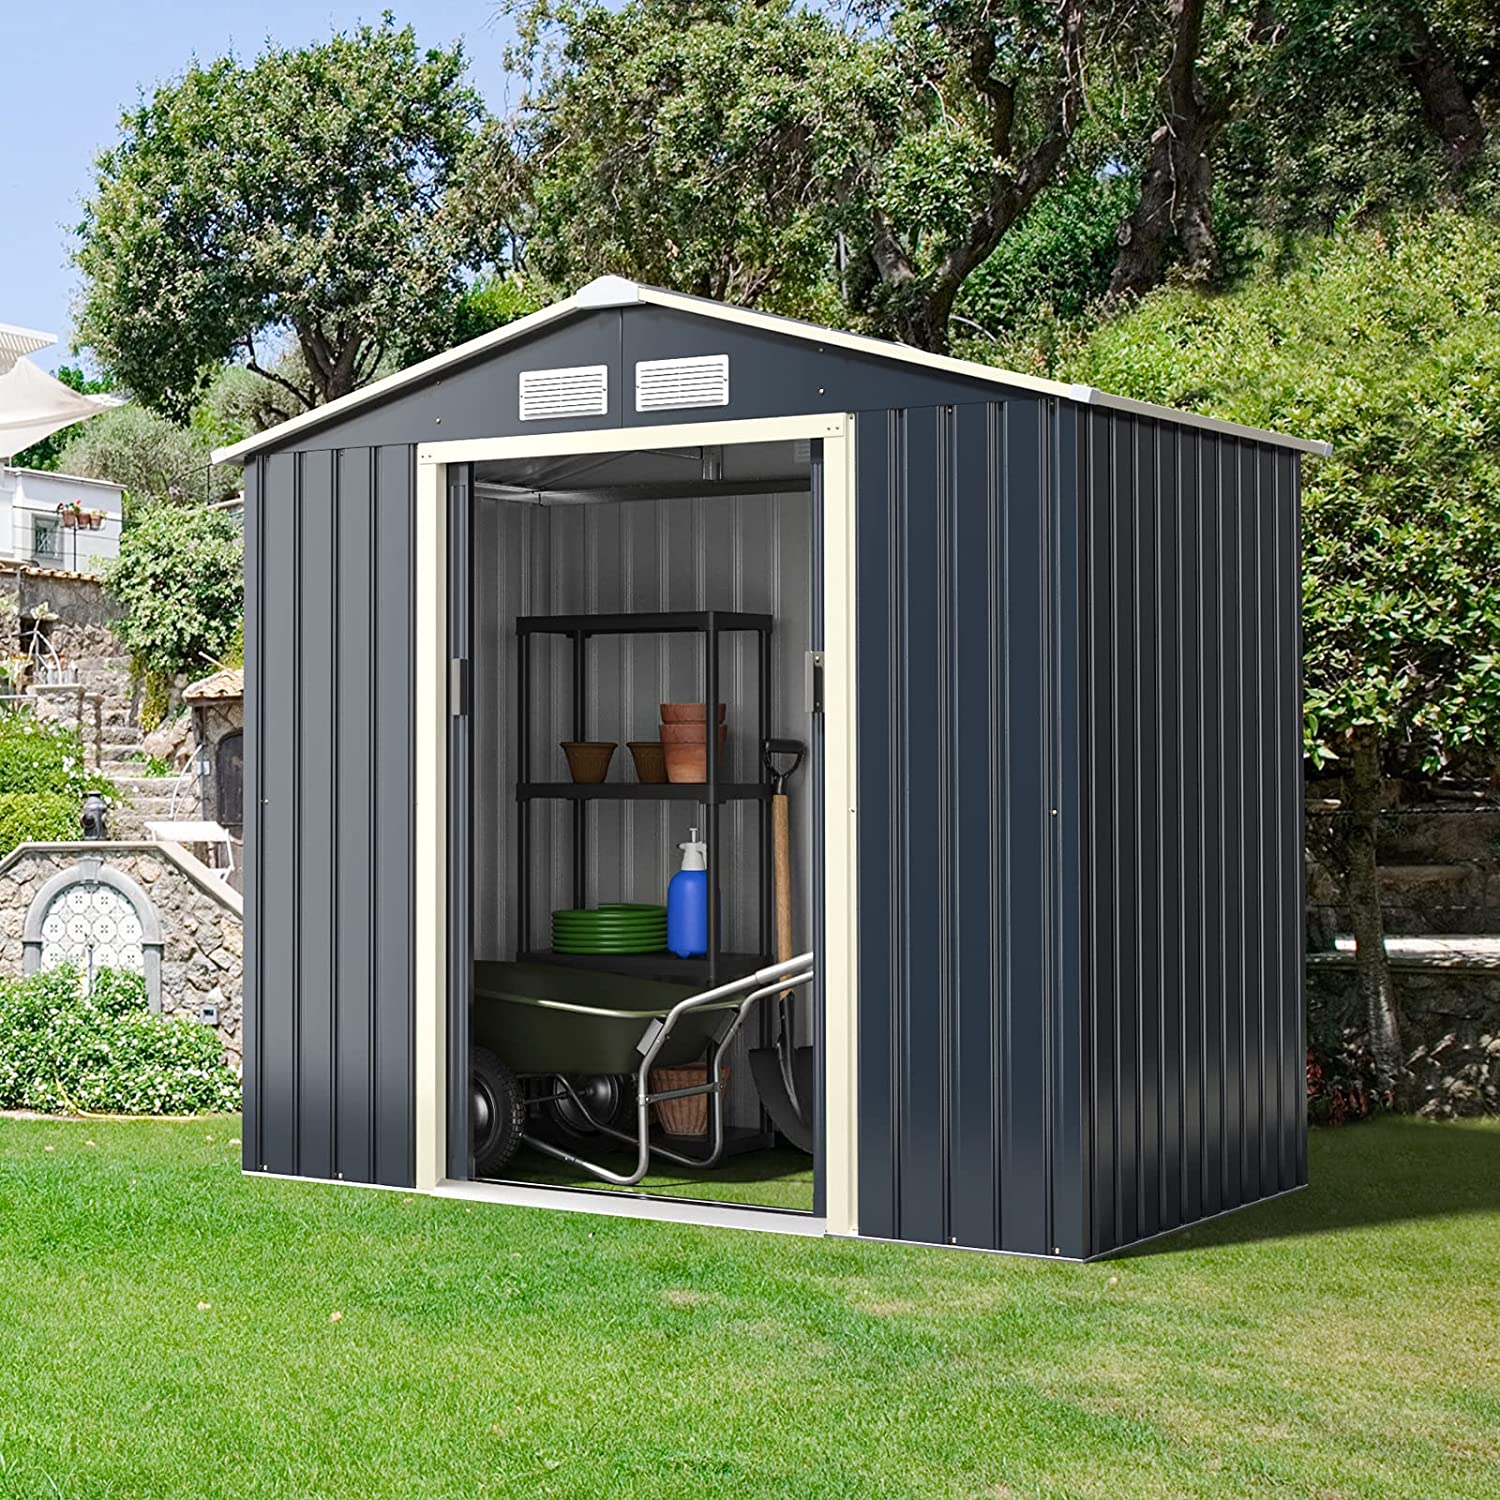 7’ x 4’ Outdoor Patio Metal Storage Shed, Building Organizer with Double Sliding Doors & 4 Vents for Garden Backyard Farm